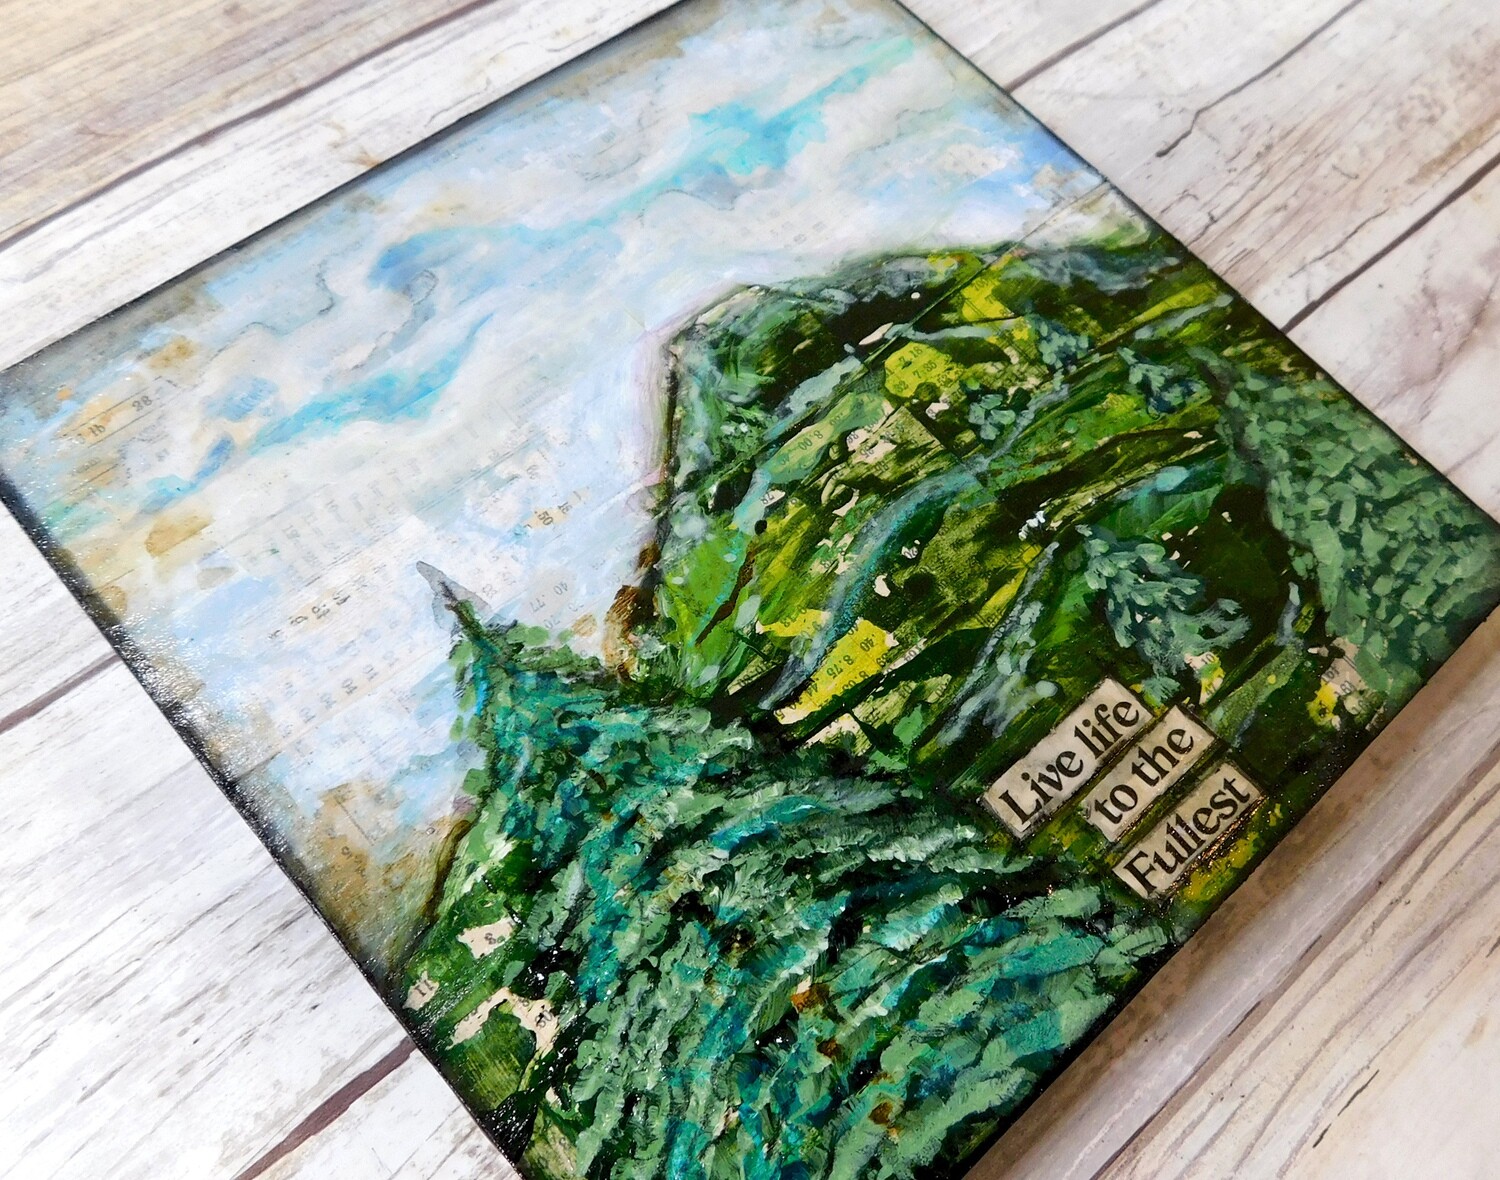 "Live life to the fullest" evergreens 6x6 mixed media original